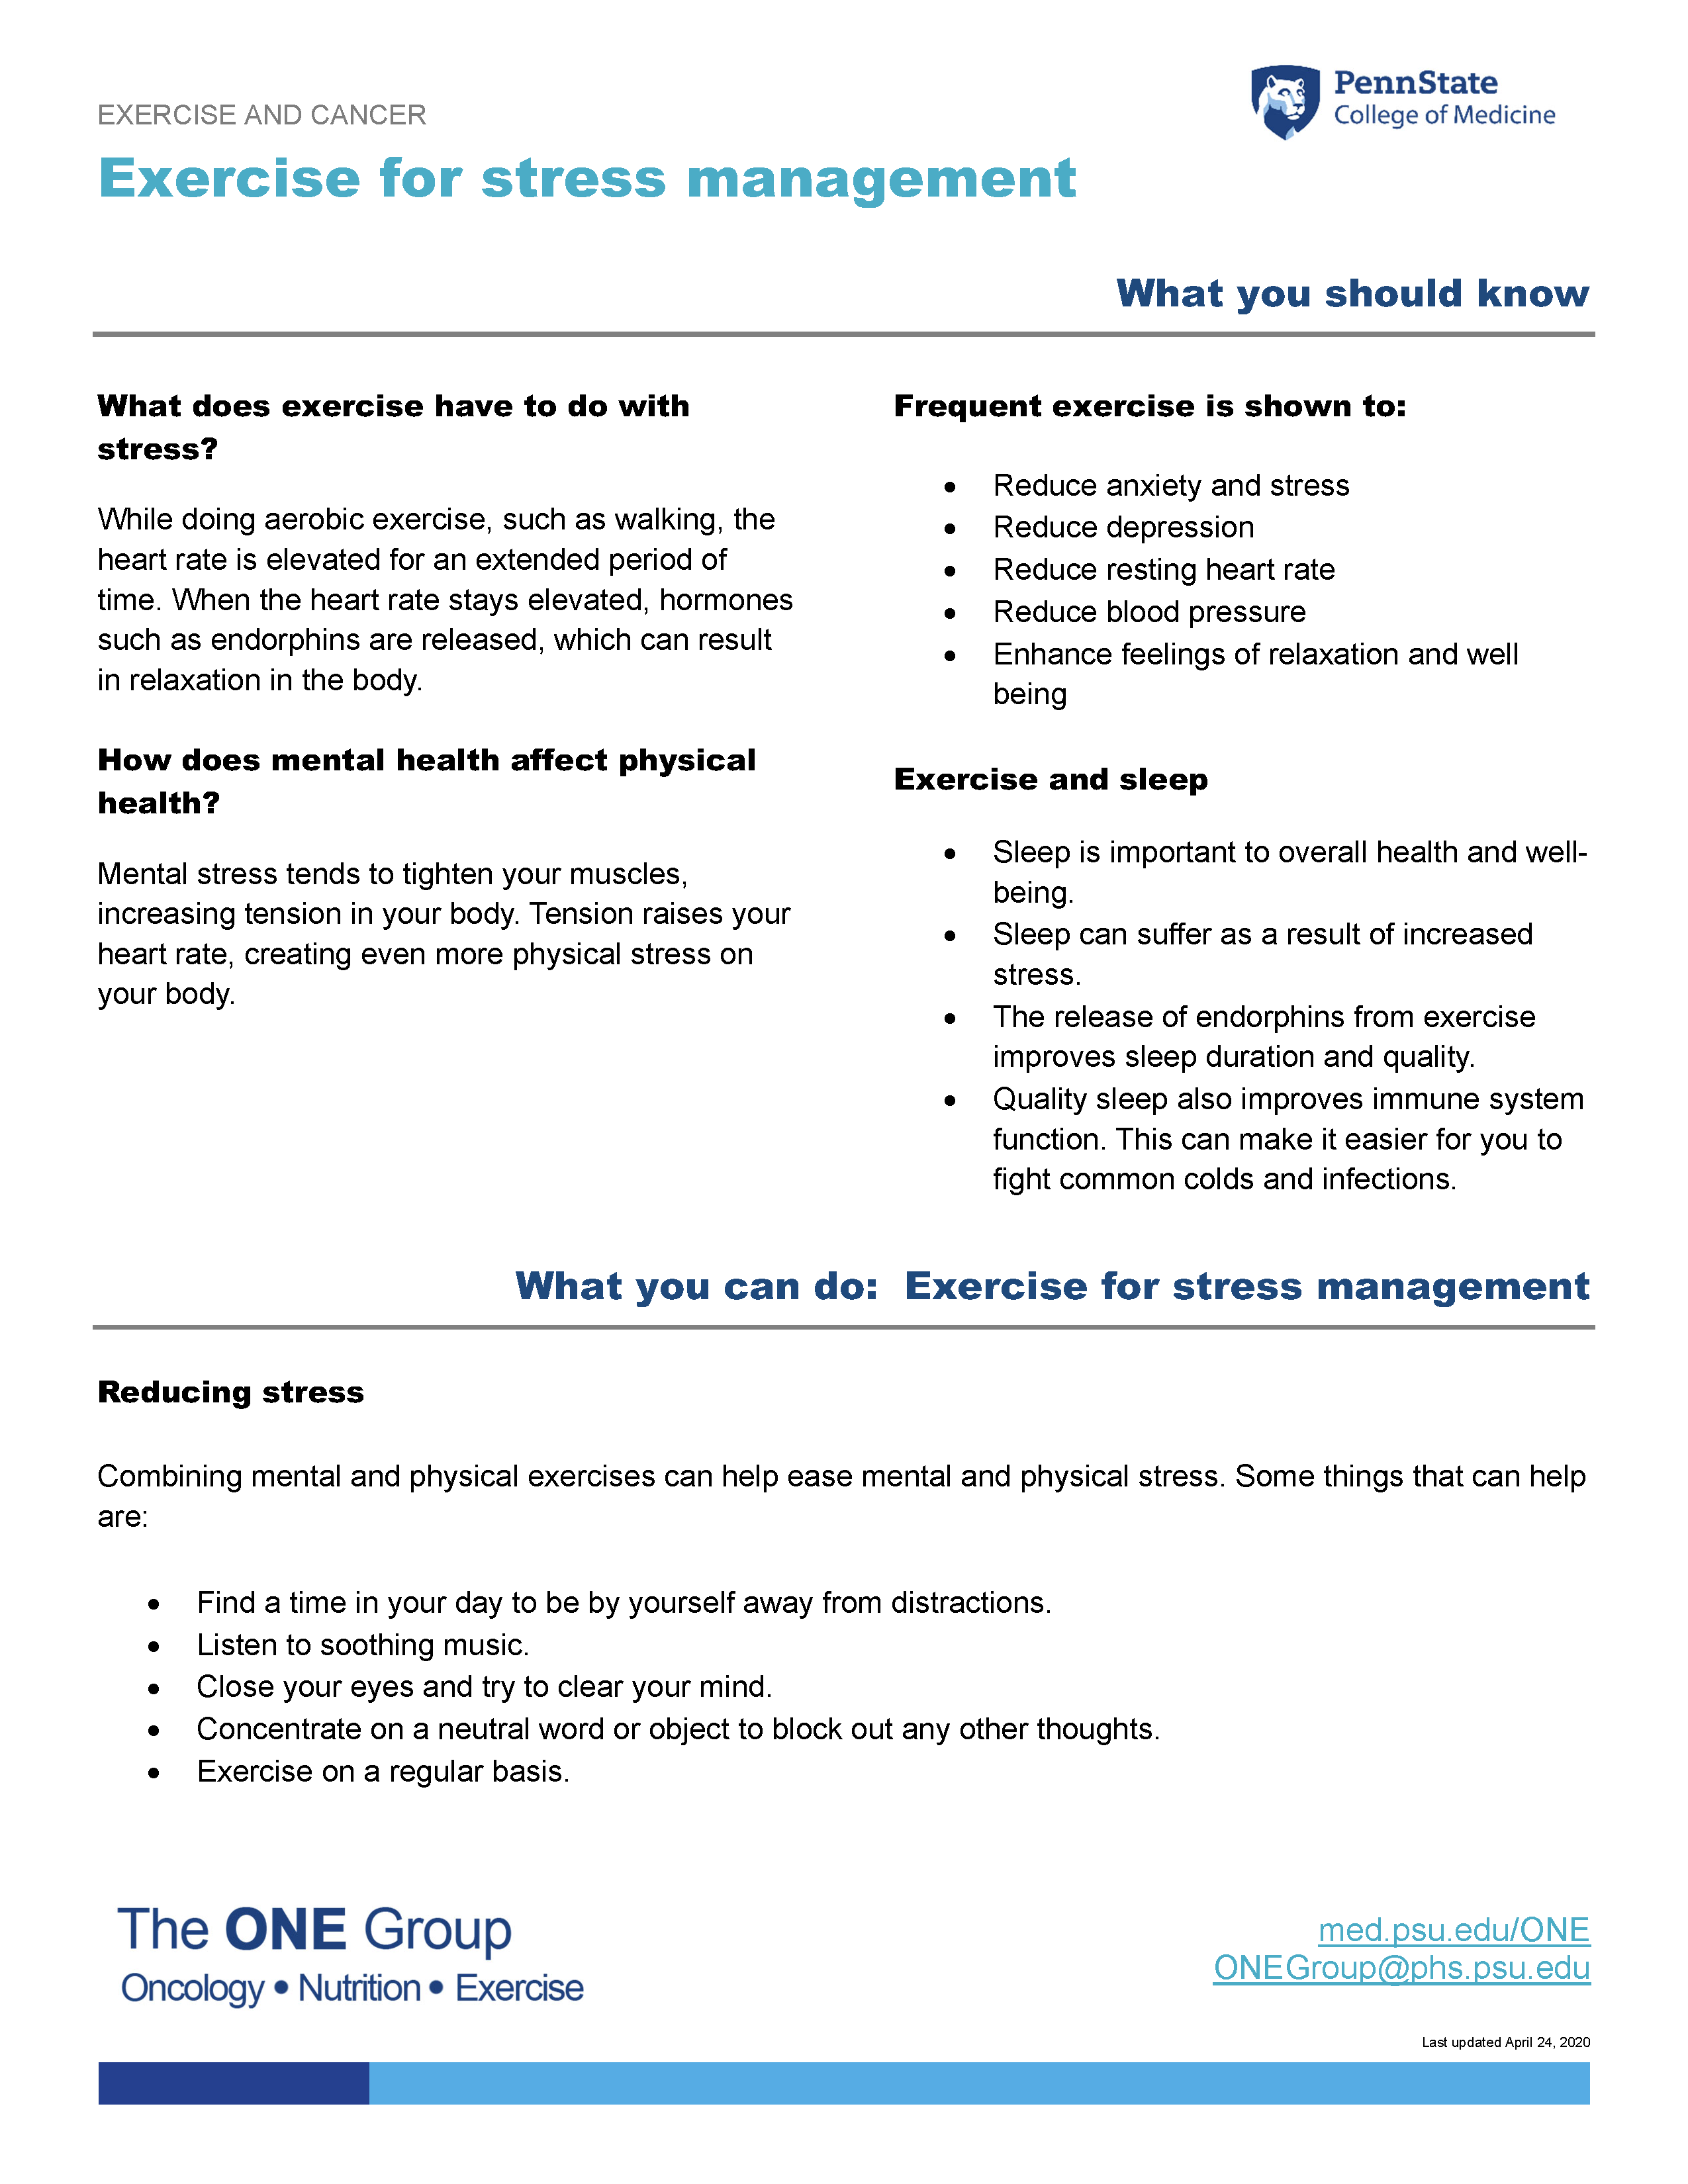 The exercise for stress management guide from The ONE Group includes the information on this page, formatted for print.